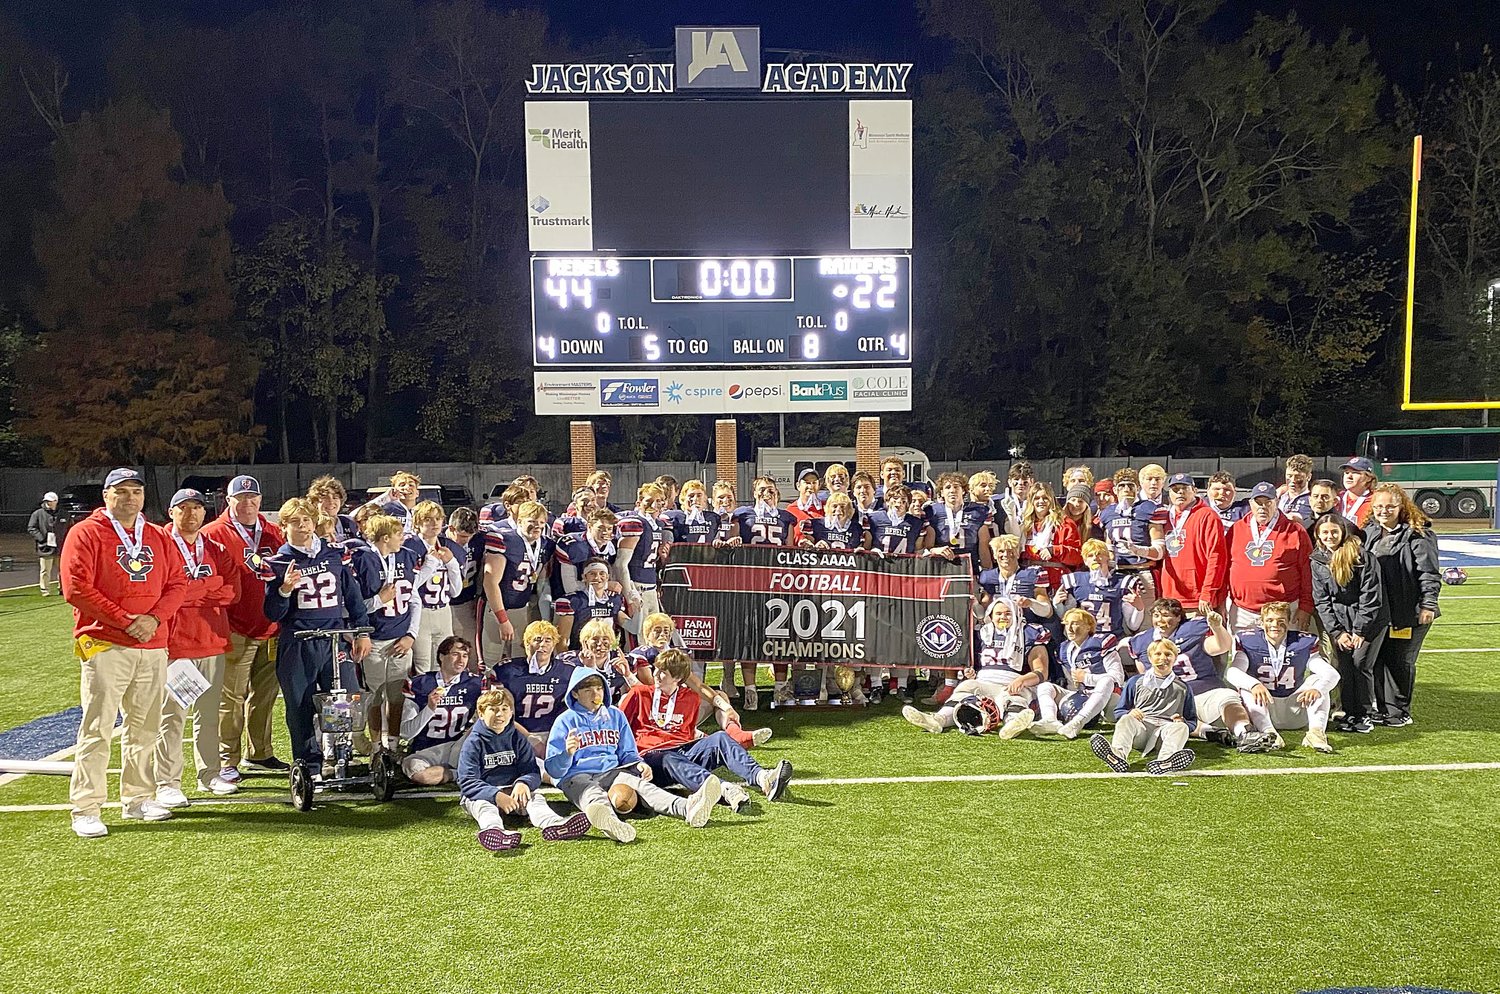 Tri County Academy was one of three local high schools that won a state football championship in 2021.